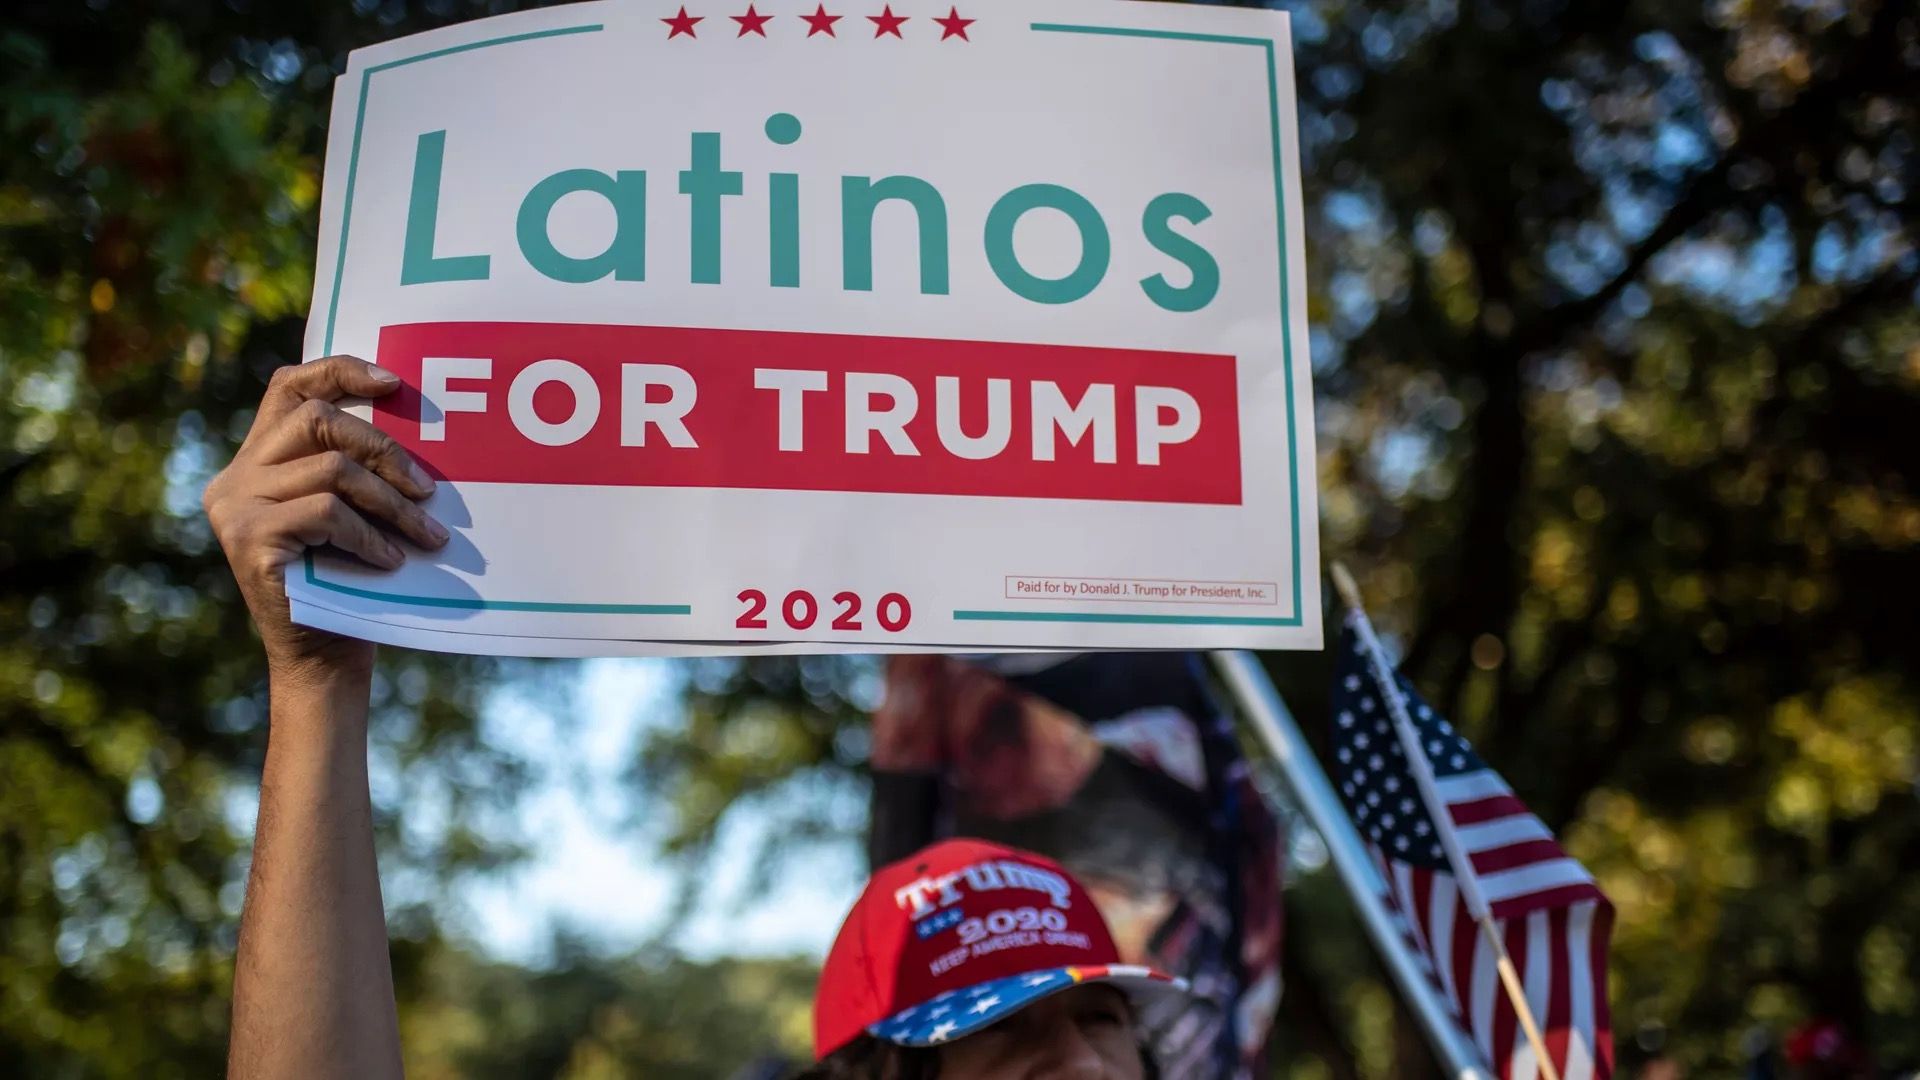 A pro-Trump protestor is seen holding a "Latinos for Trump" sign.